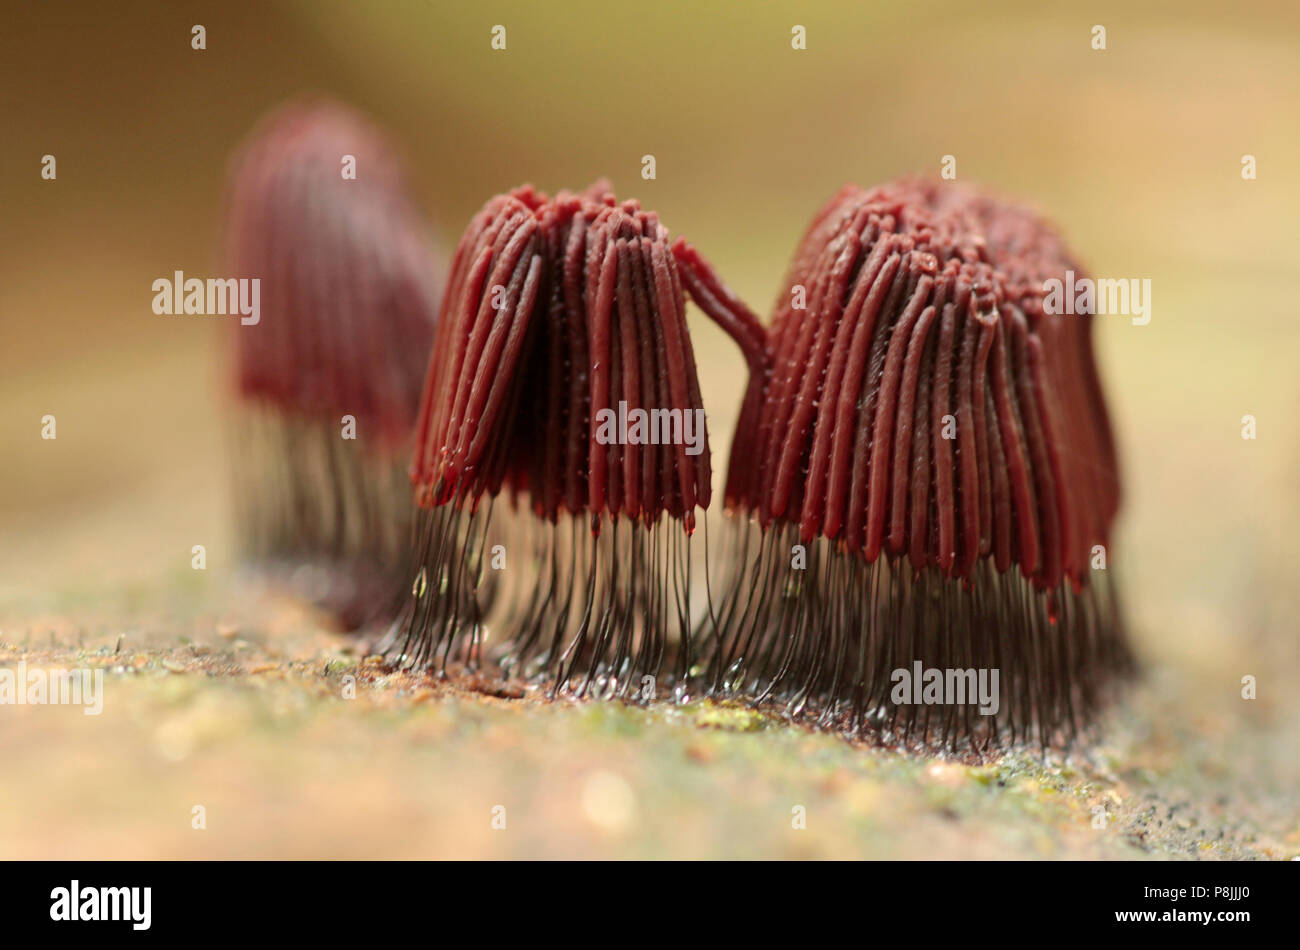 Stemonitis axifera, a slime mold on a stem of a beech Stock Photo